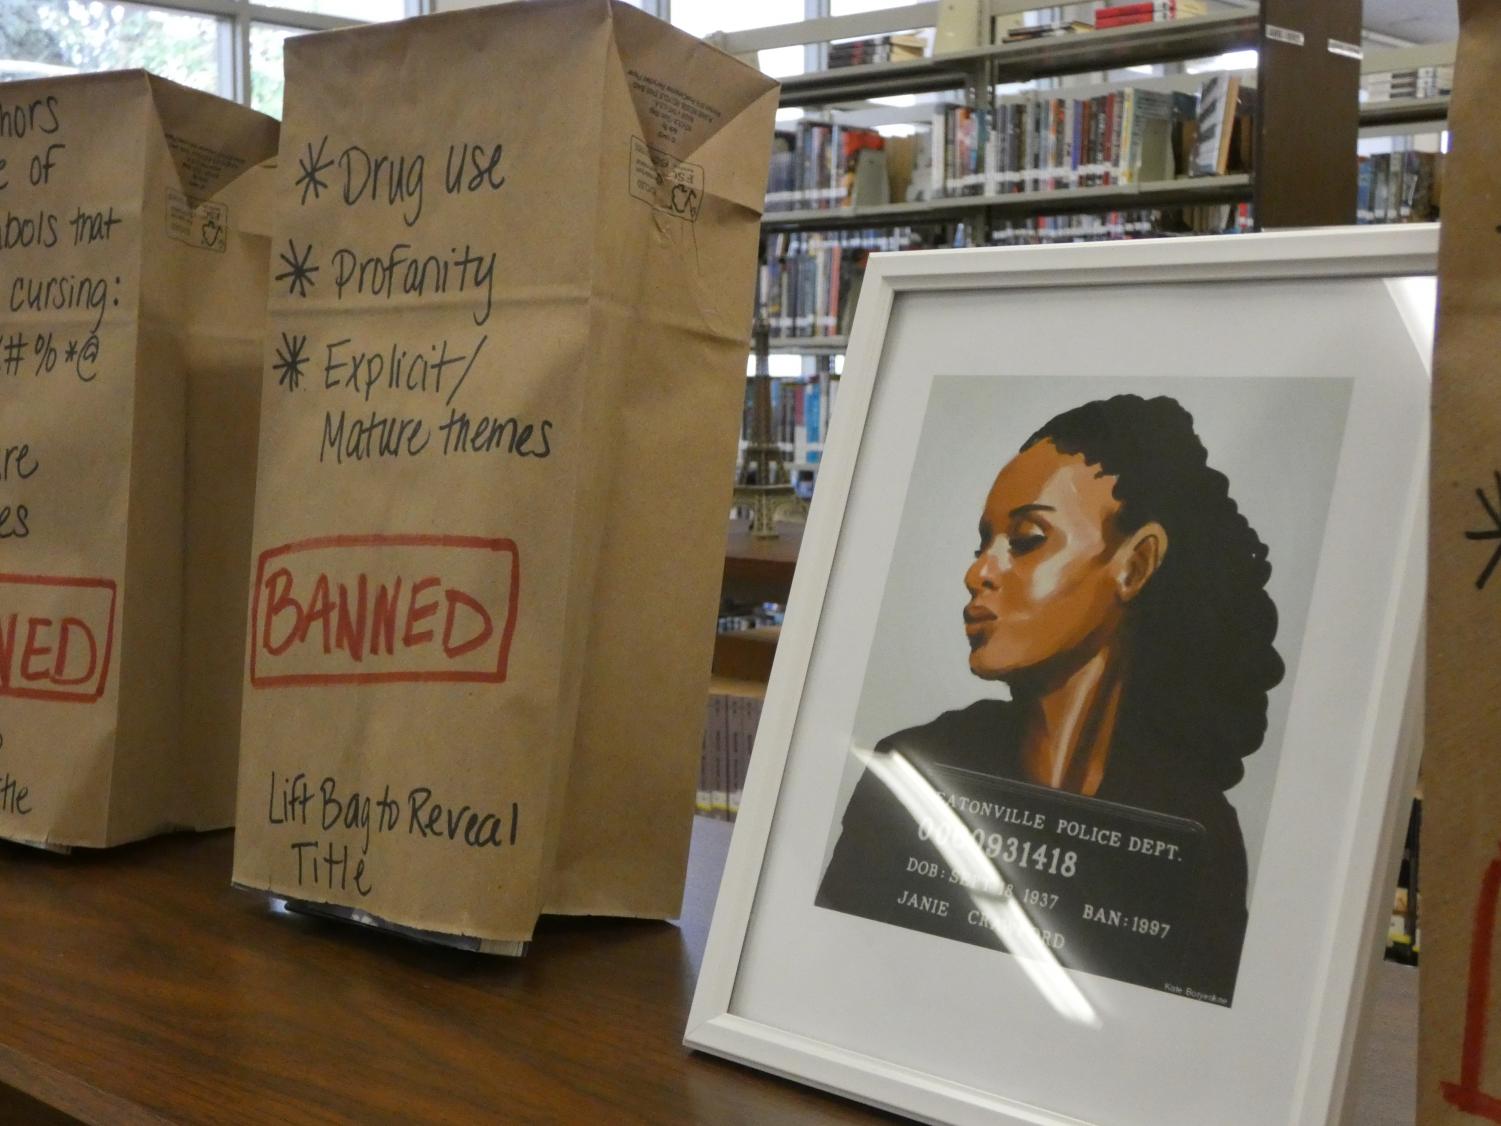 The RHS librarys Banned Book Week display showed students the wide variety of books, like Milk and Honey, that have been banned over the years across the nation. A mugshot drawing of Janie Crawford, a character from another banned book, Their Eyes Were Watching God shares the shelf with the brown paper bag that hides her story.